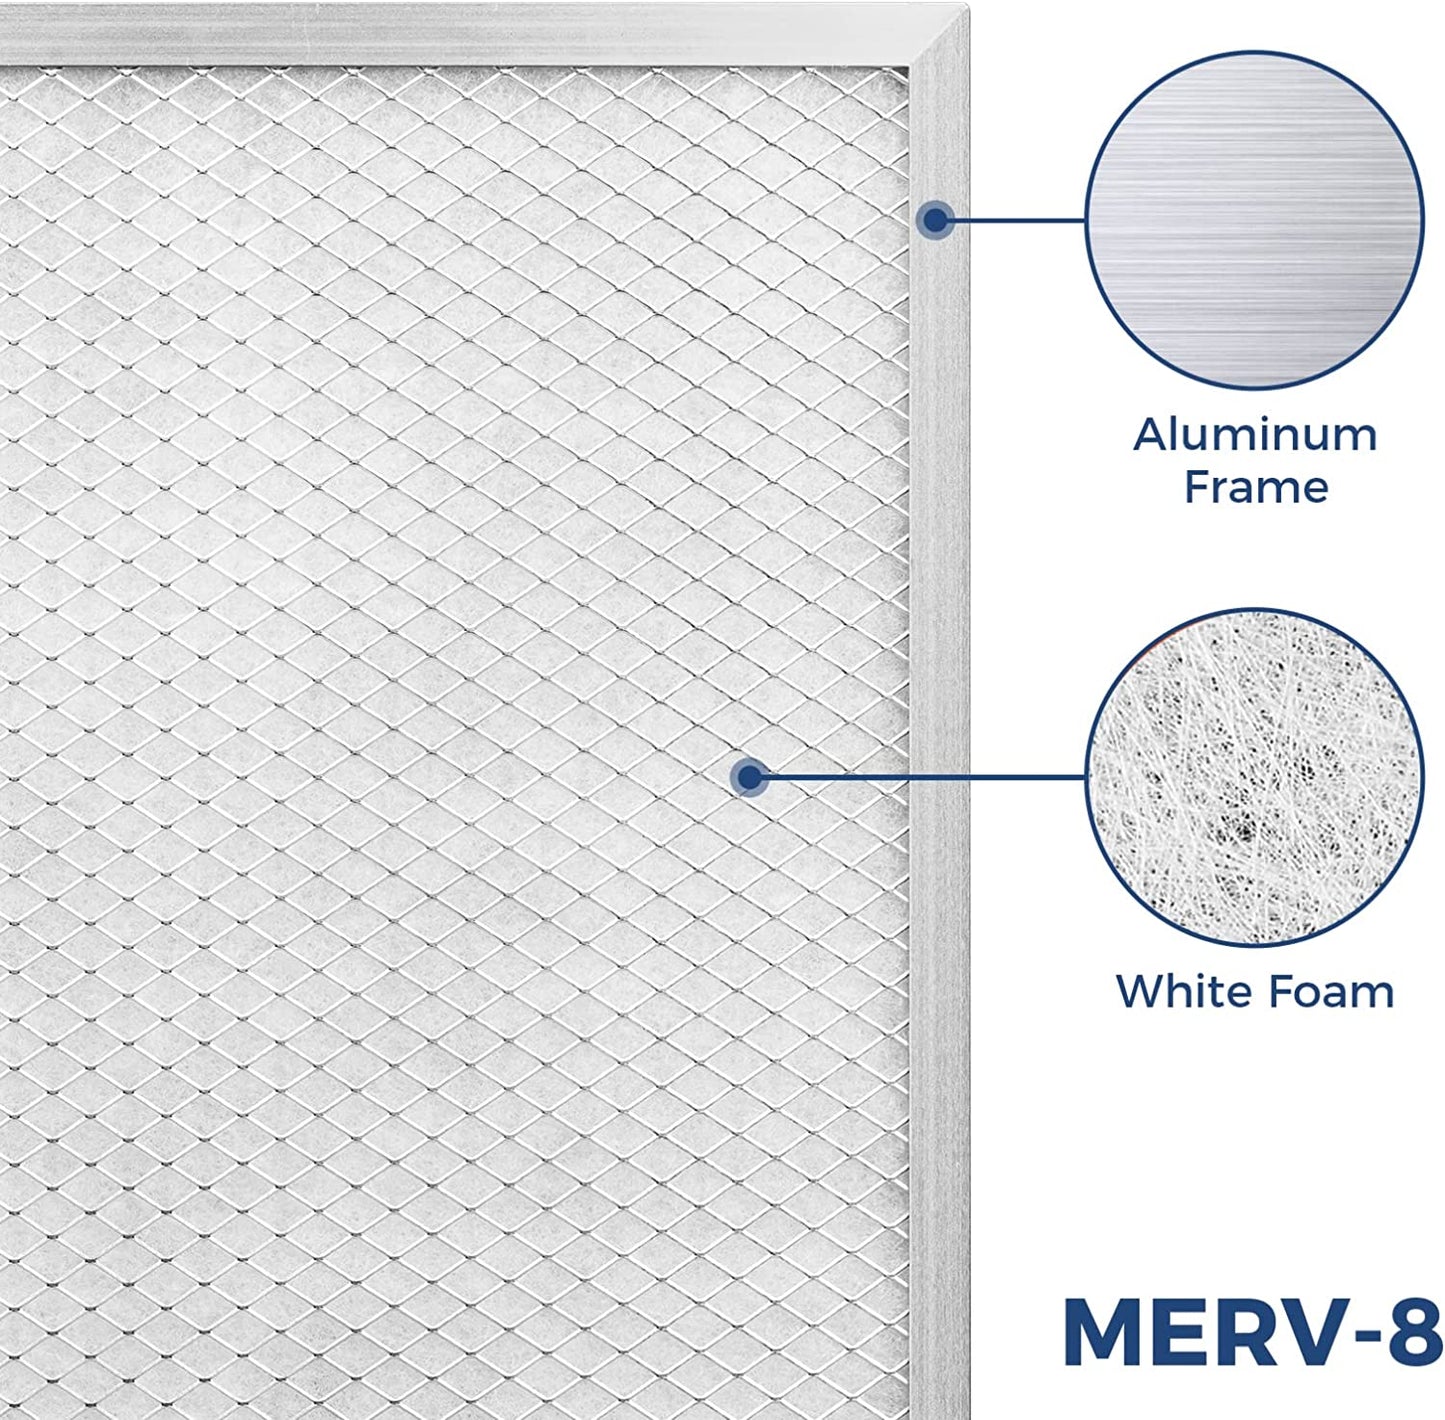 AlorAir 4 Pack MERV-8 Filter for Commercial Dehumidifiers Only Applicable to Storm LGR Extreme